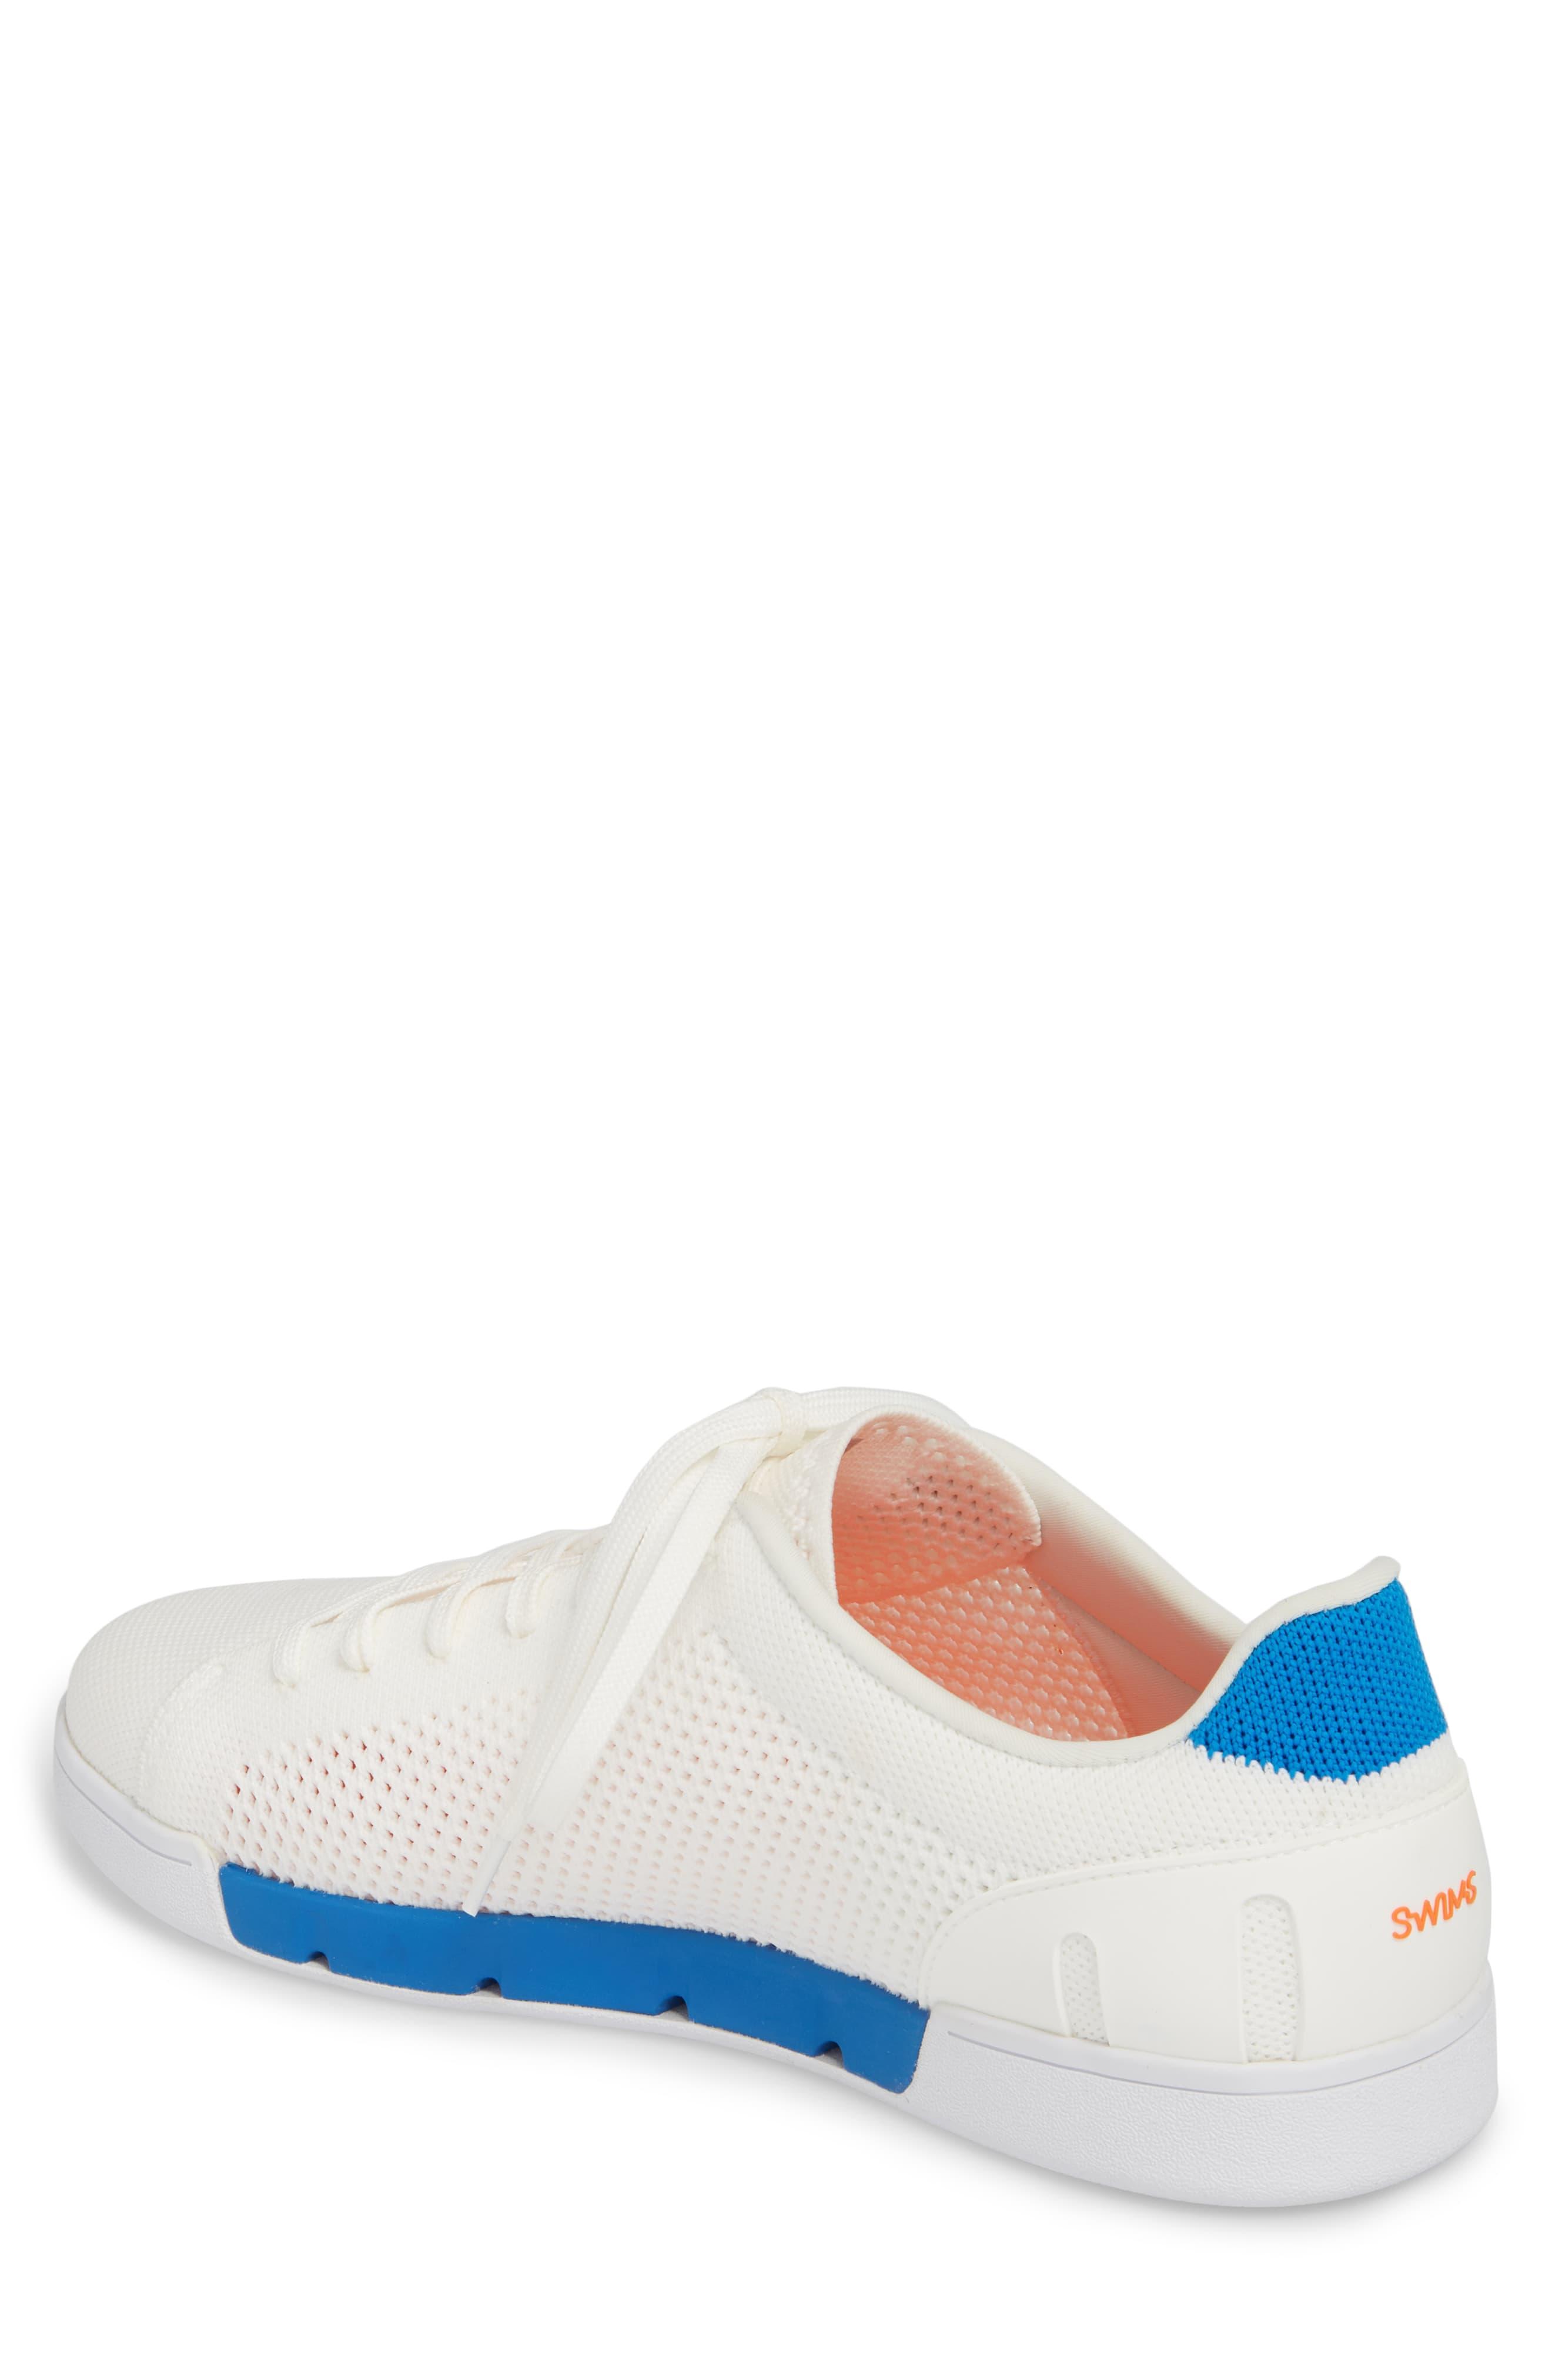 swims white sneakers